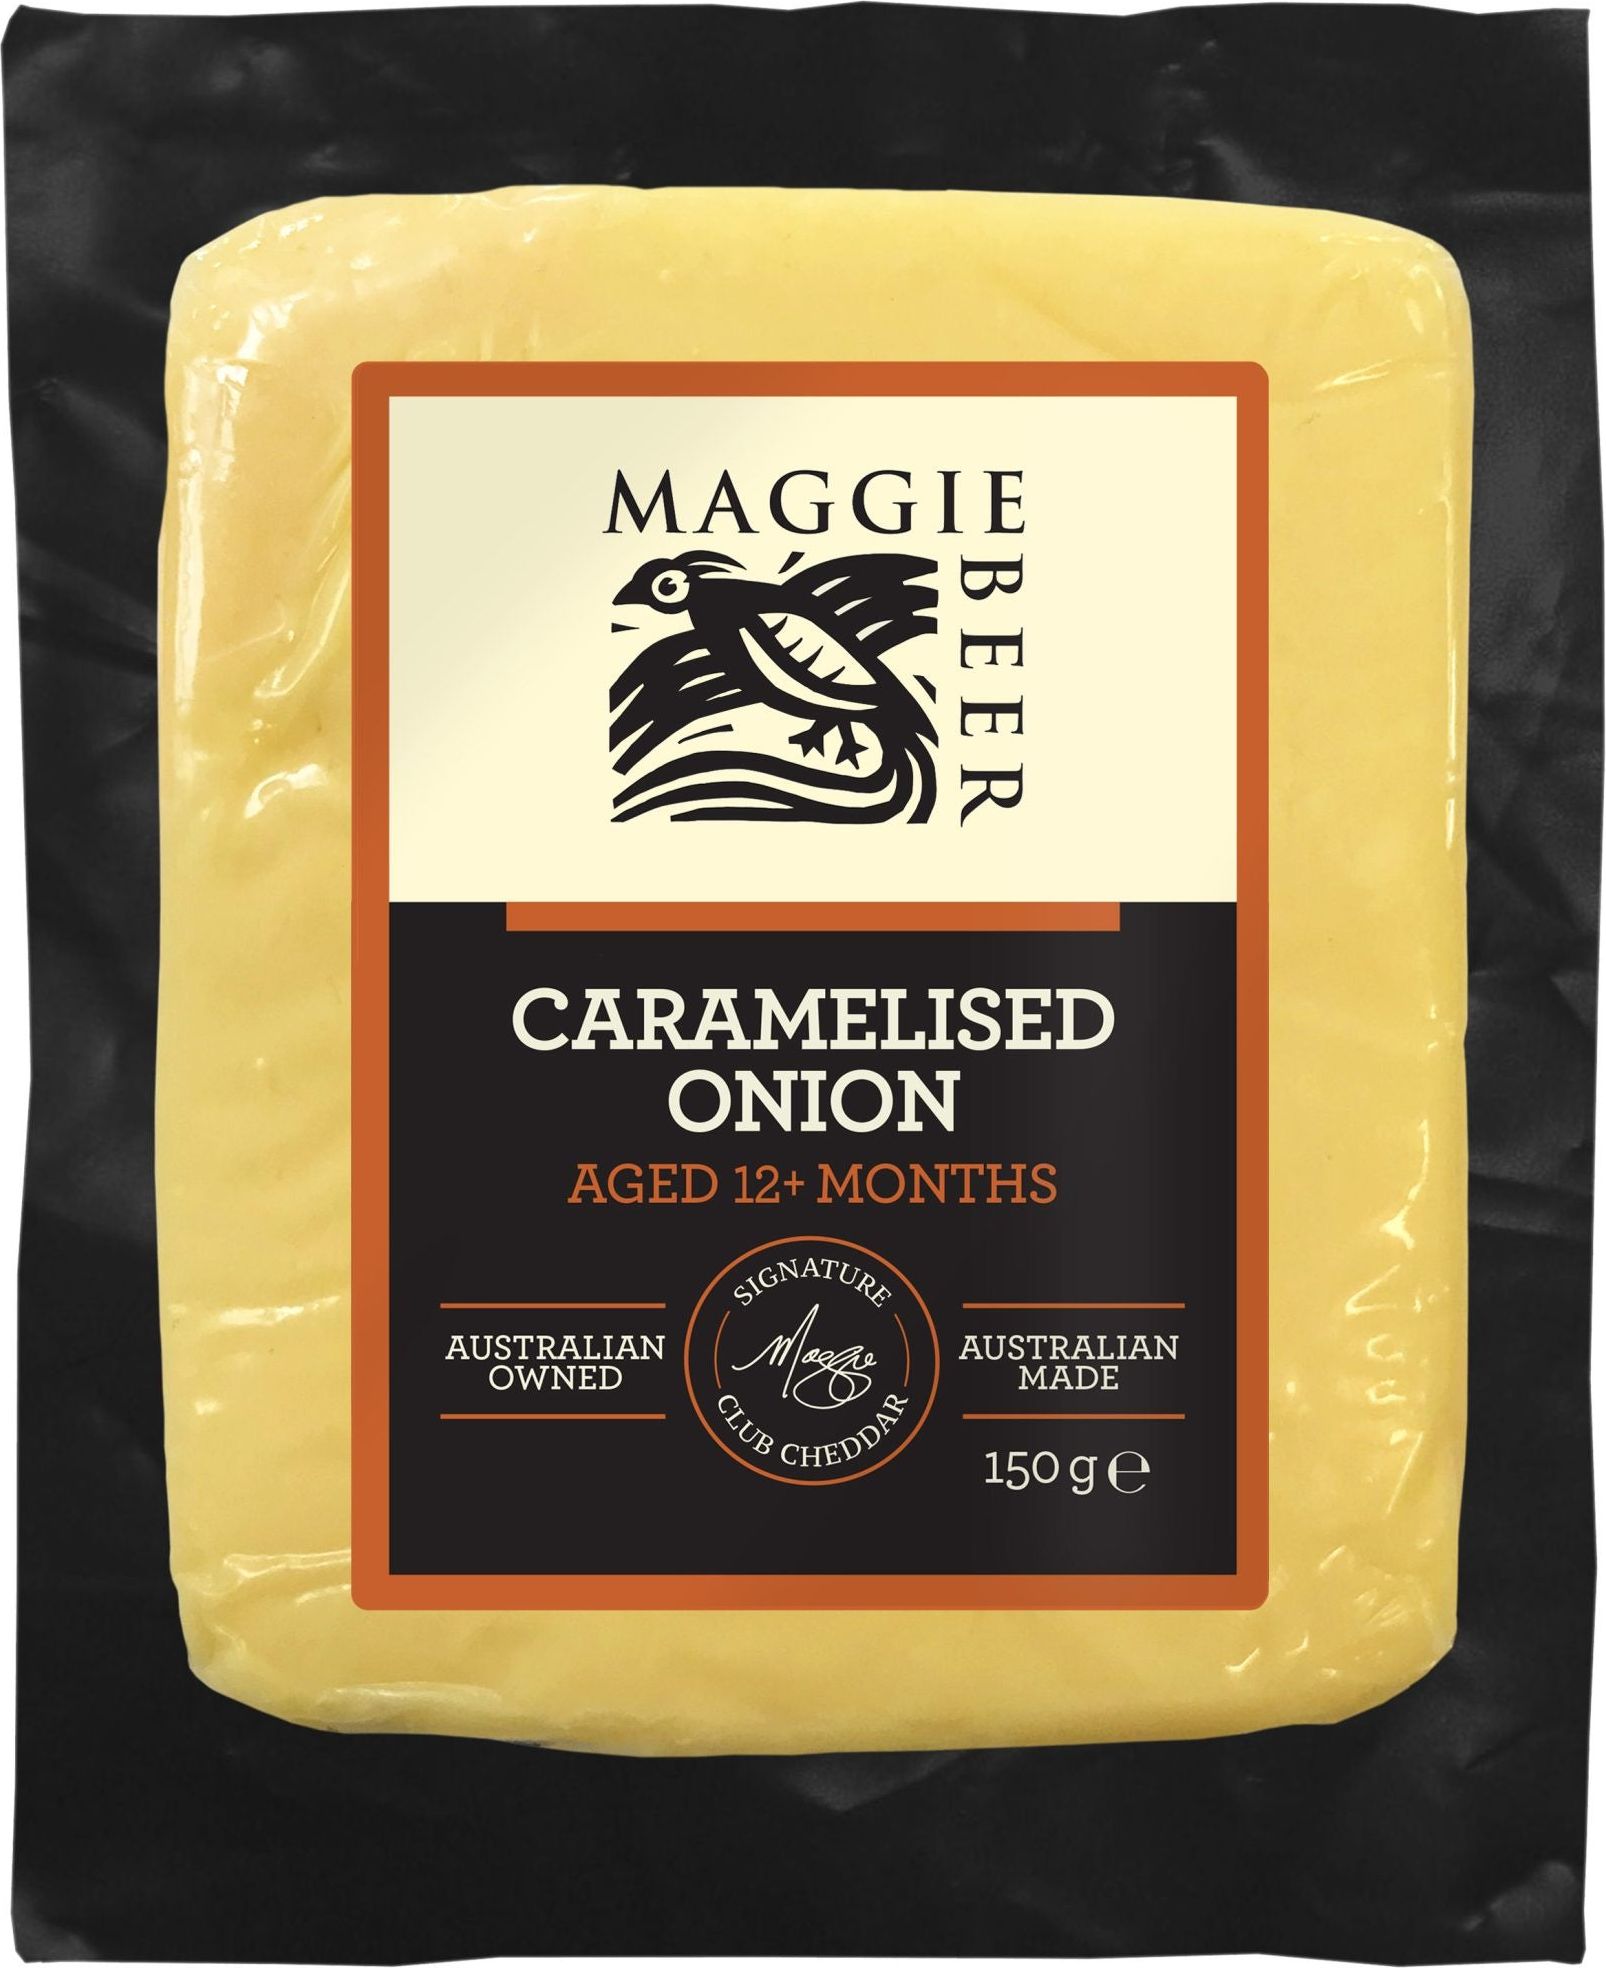 Maggie Beer Carmalised Onion Cheddar Cheese 150g